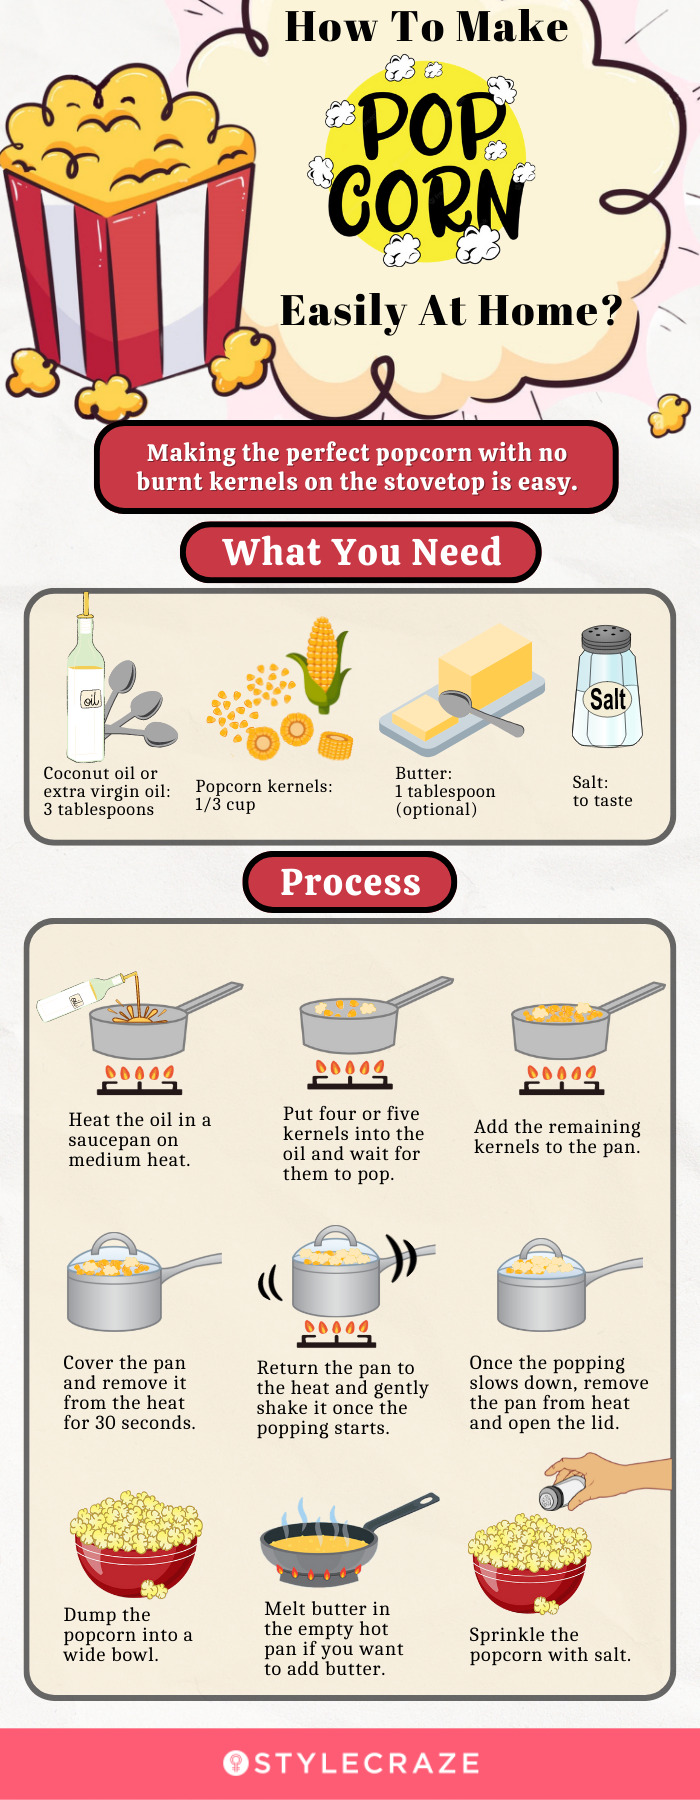 how to make pop corn easily at home [infographic]